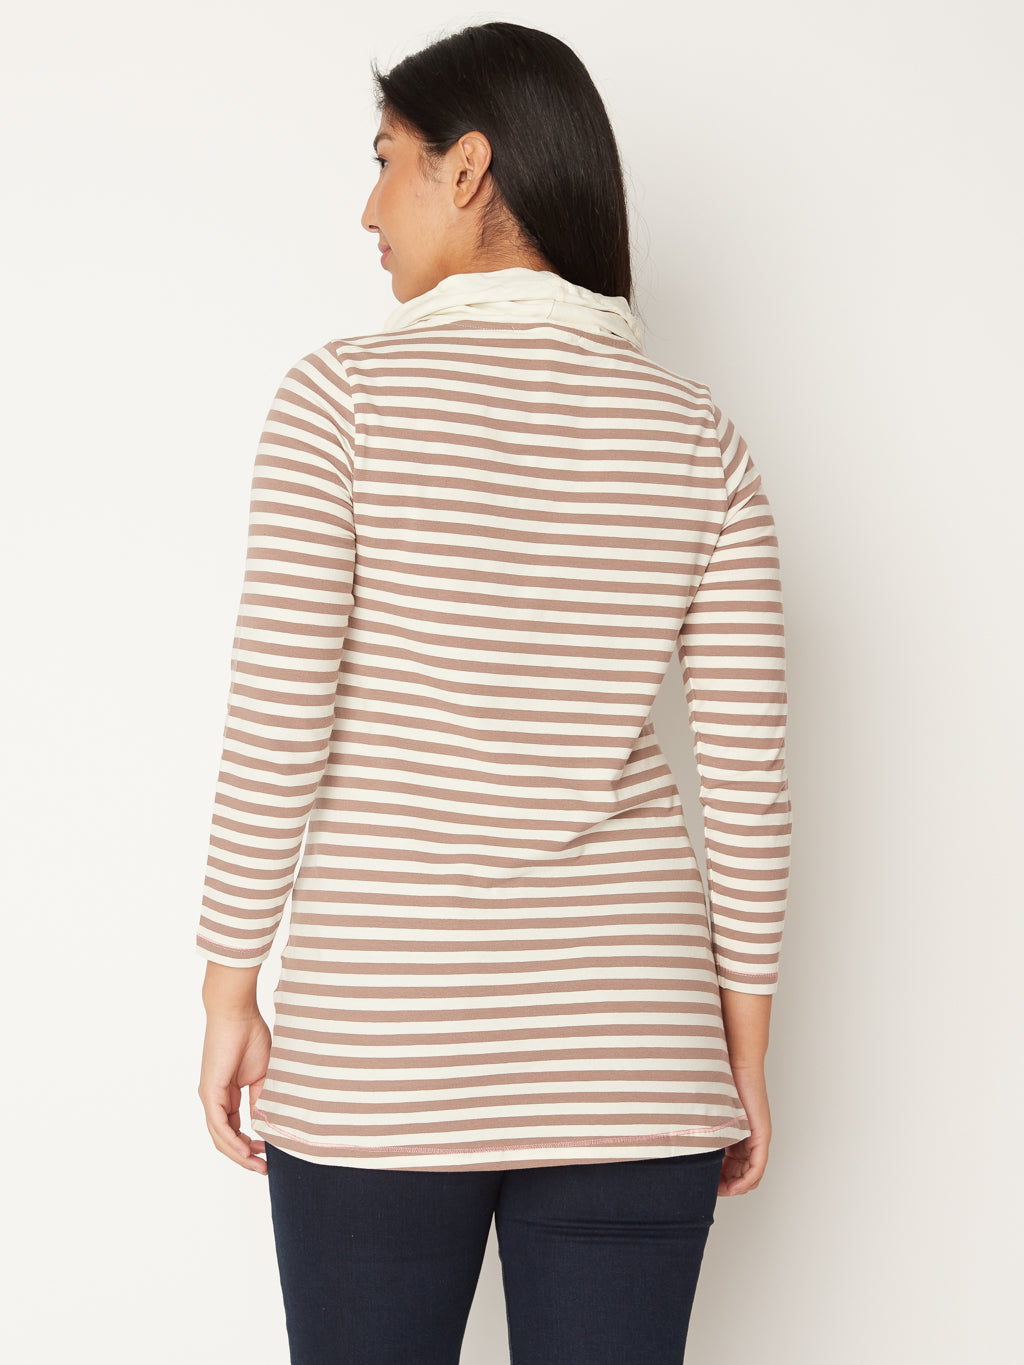 Semi-fitted knit tunic